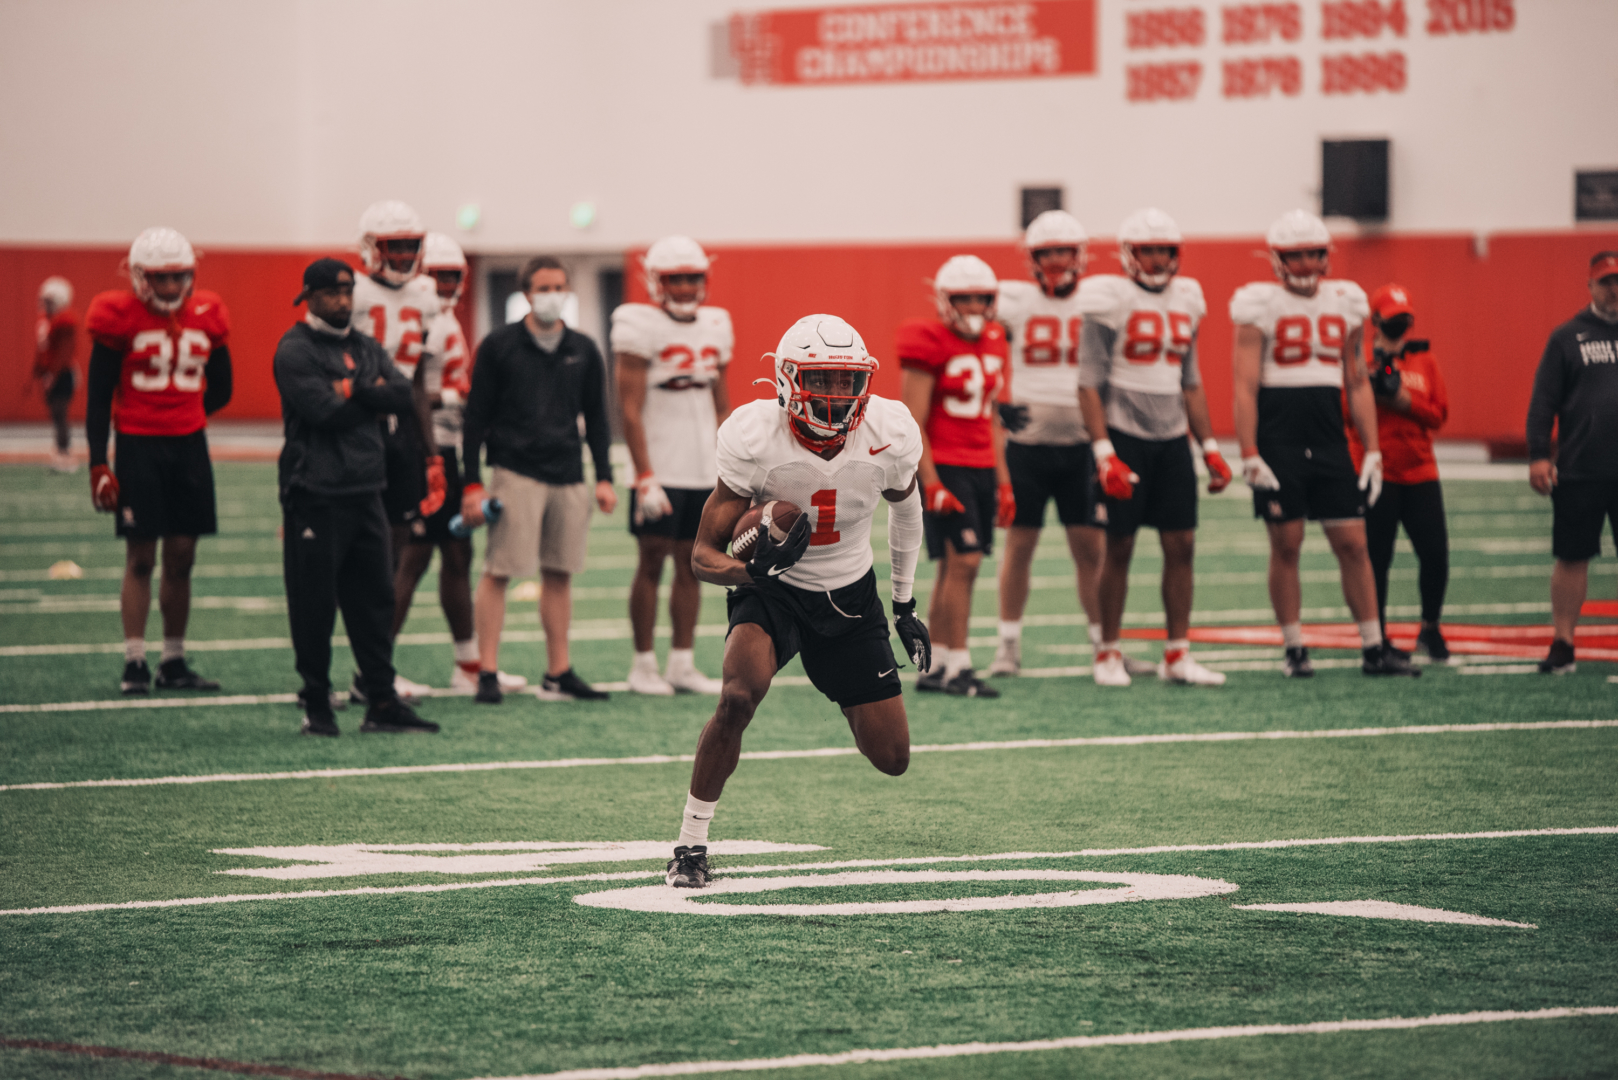 Junior wide receiver Bryson Smith runs with the ball in the open field during a 2021 UH football spring practice. | Courtesy of UH athletics